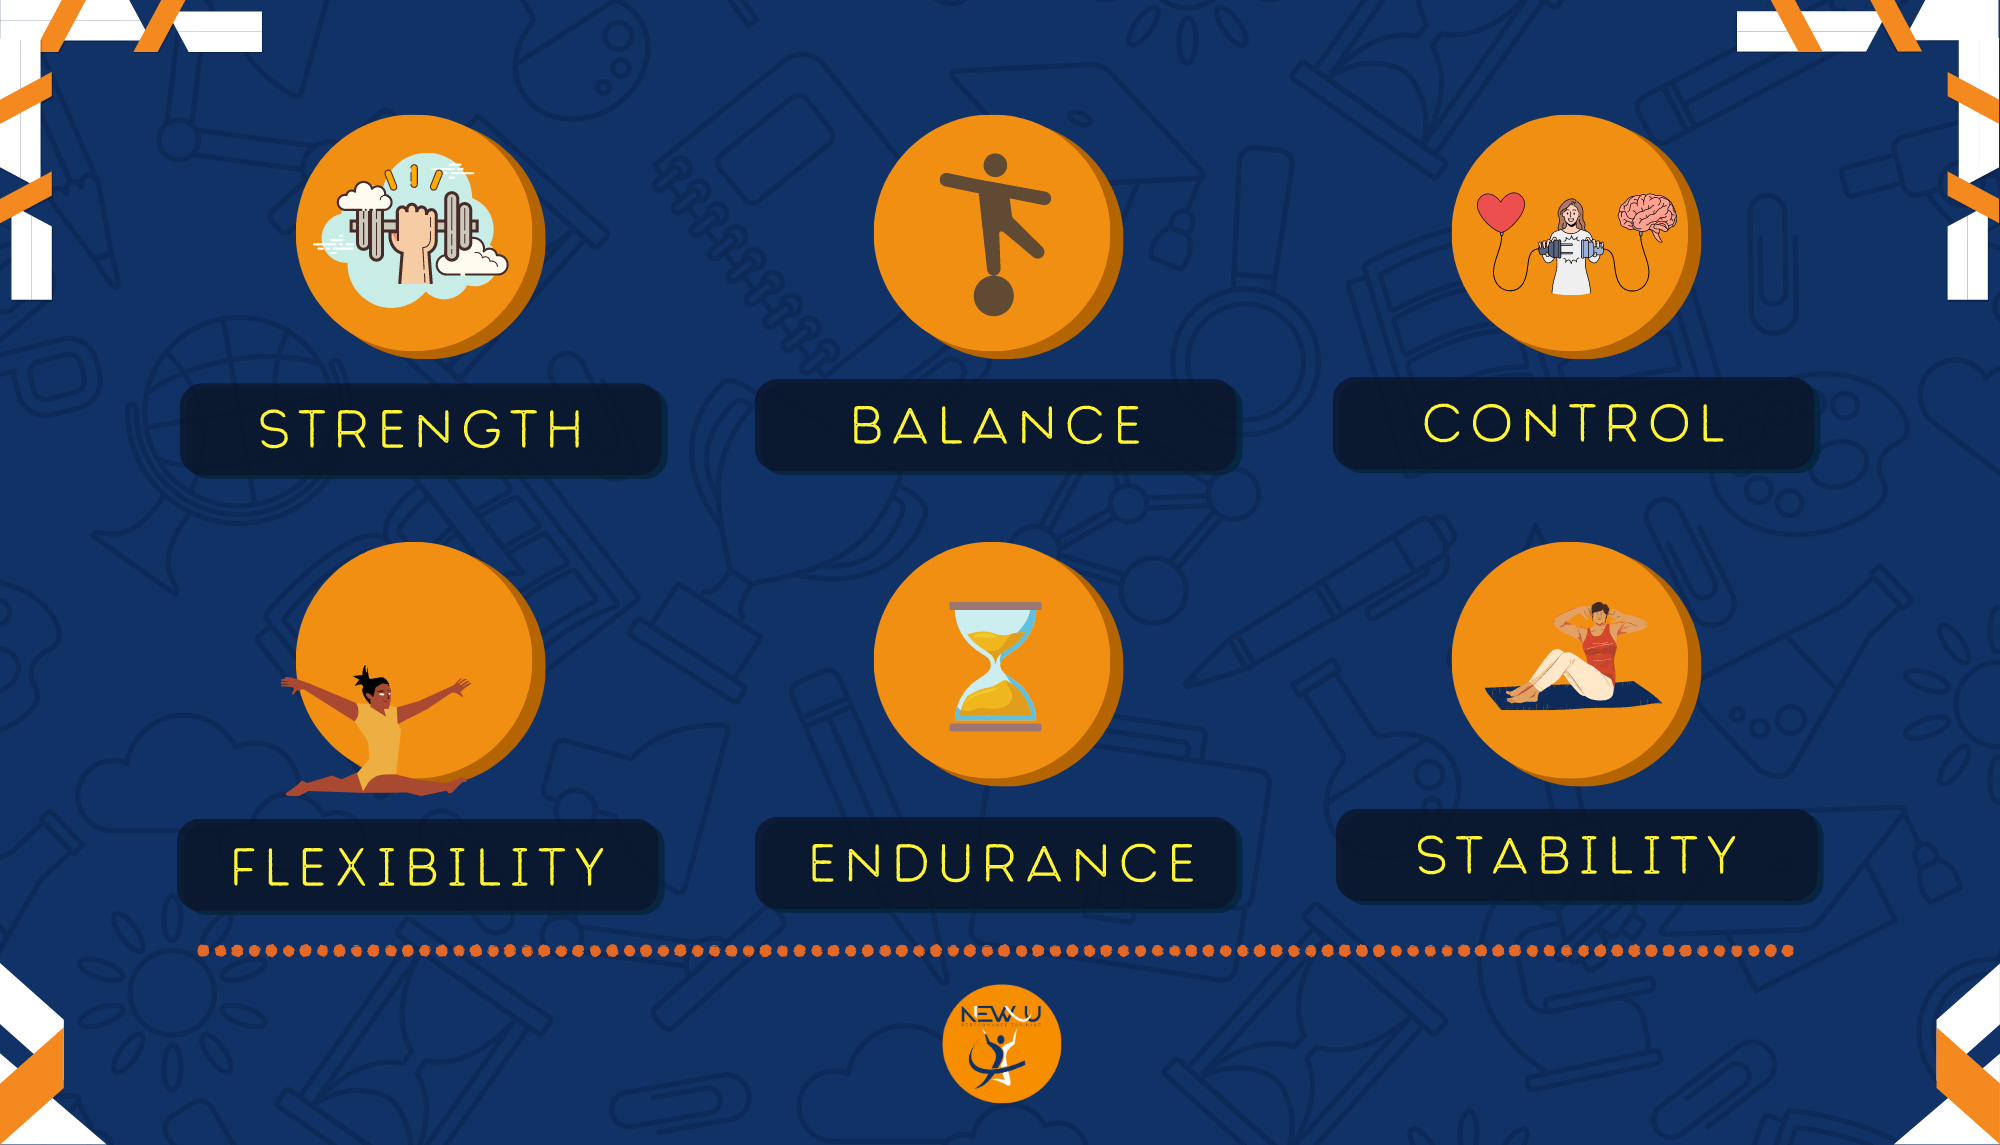 What are the basic principles of functional fitness?